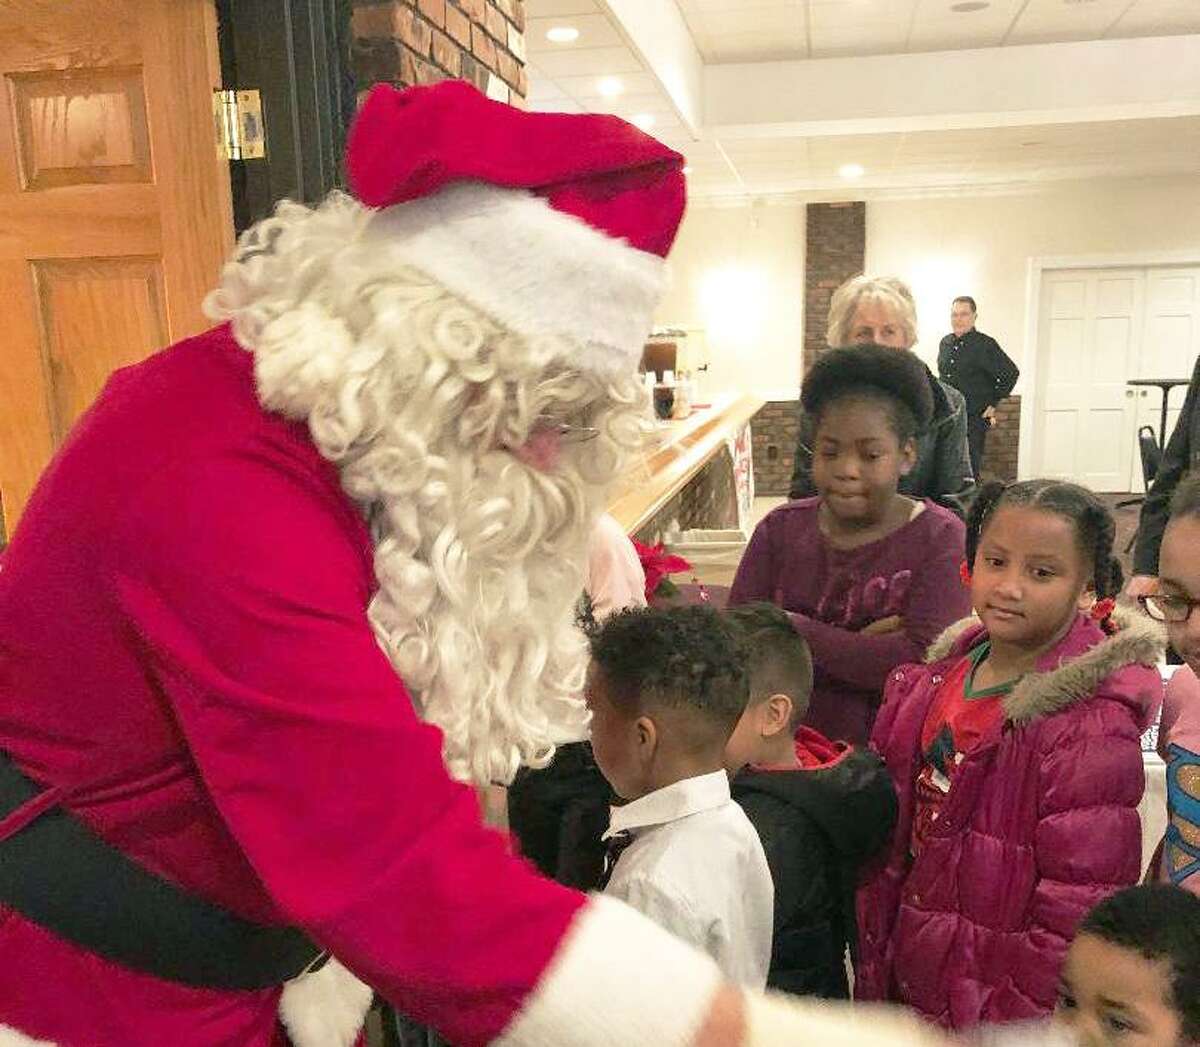 Members of the South Fire District IAFF Local 3918, Connecticut Valley Hospital Police and Middletown Elks Lodge 771 spread joy throughout the city during its annual Adopt-A-Family program Dec. 22. Here, Santa interacts with children.